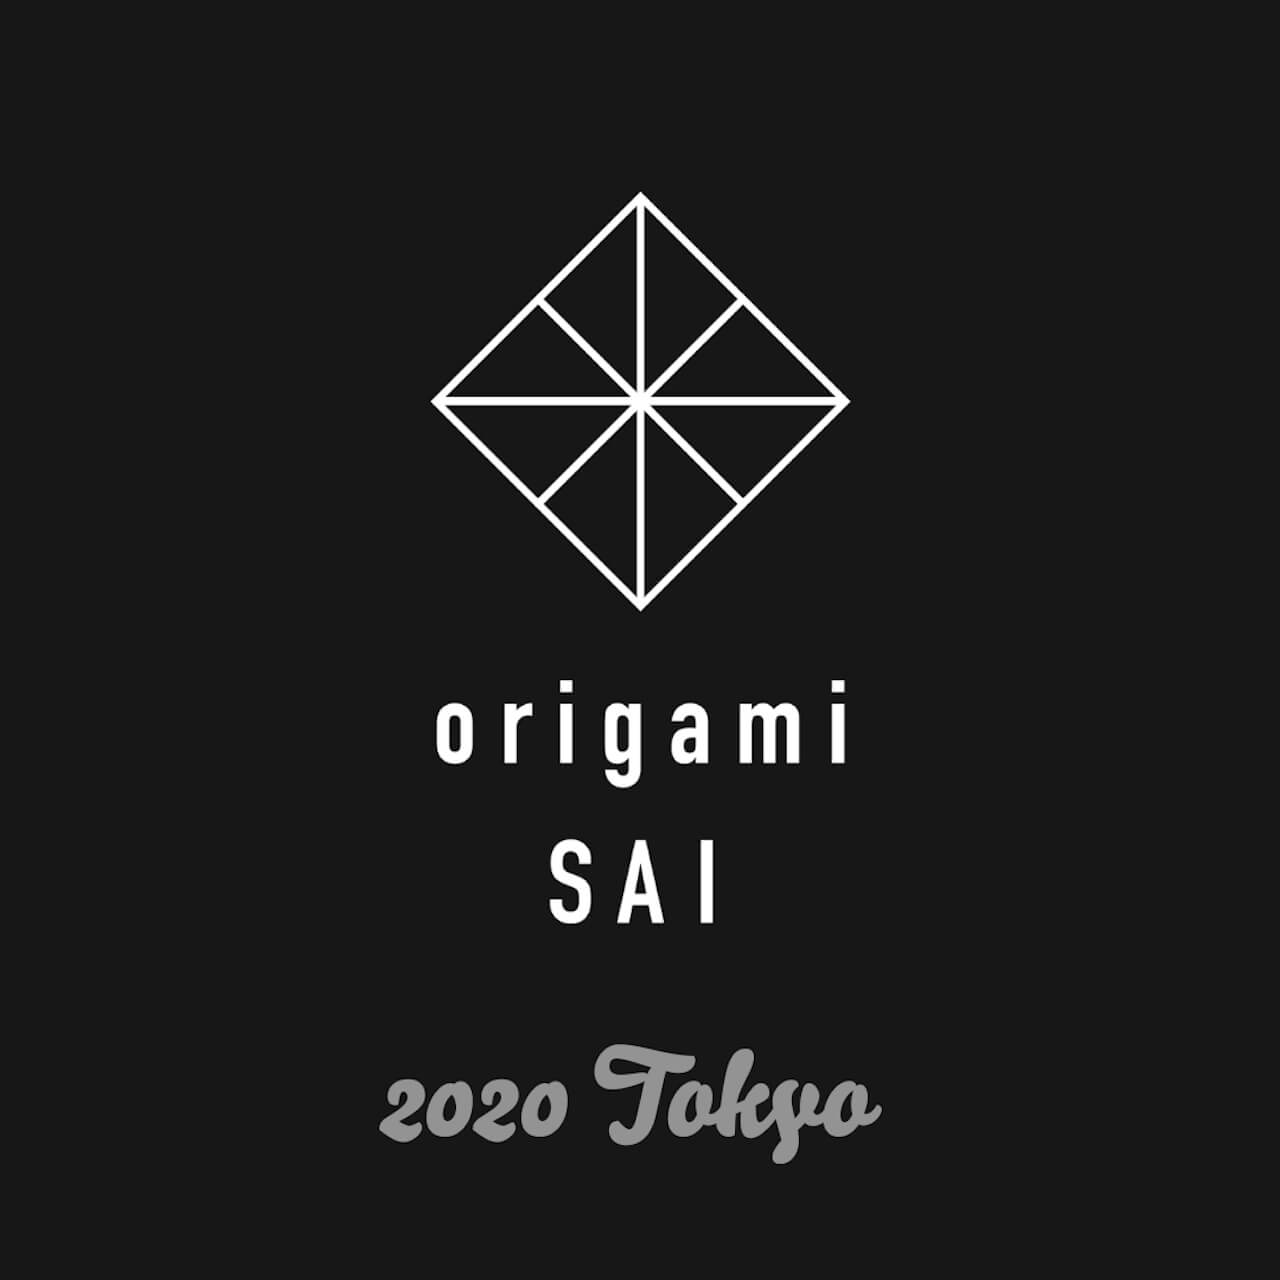 Ovall｜Looking Back 2019 ～今年のベストショットは？ interview20191213-origami-production-3